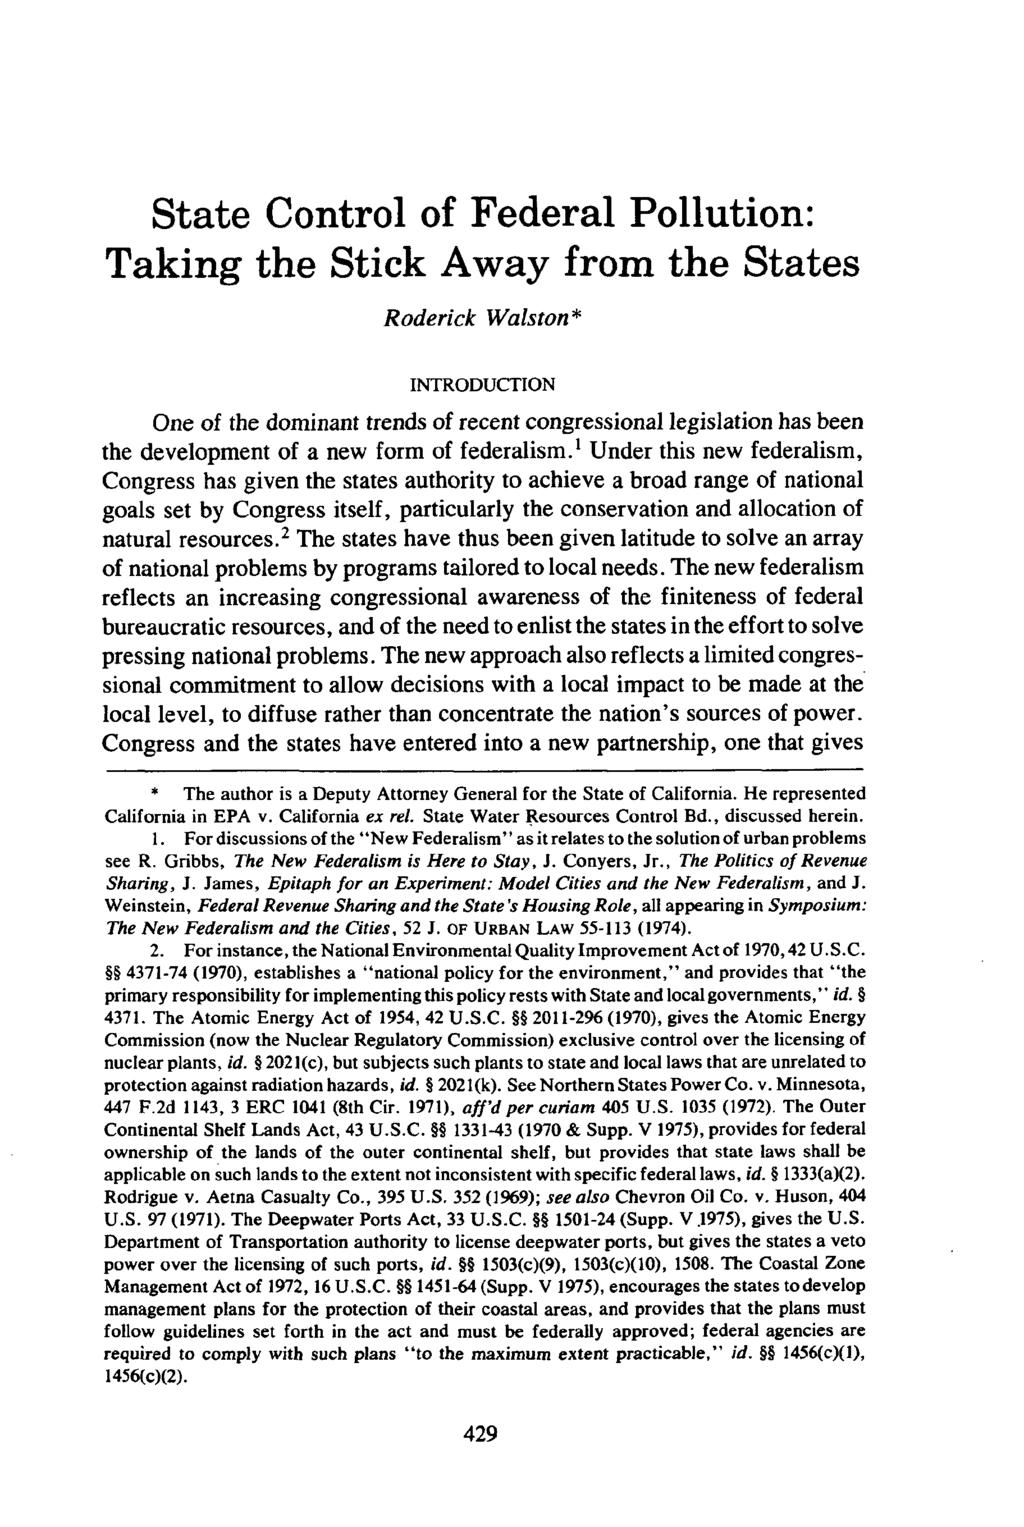 State Control of Federal Pollution: Taking the Stick Away from the States Roderick Walston* INTRODUCTION One of the dominant trends of recent congressional legislation has been the development of a